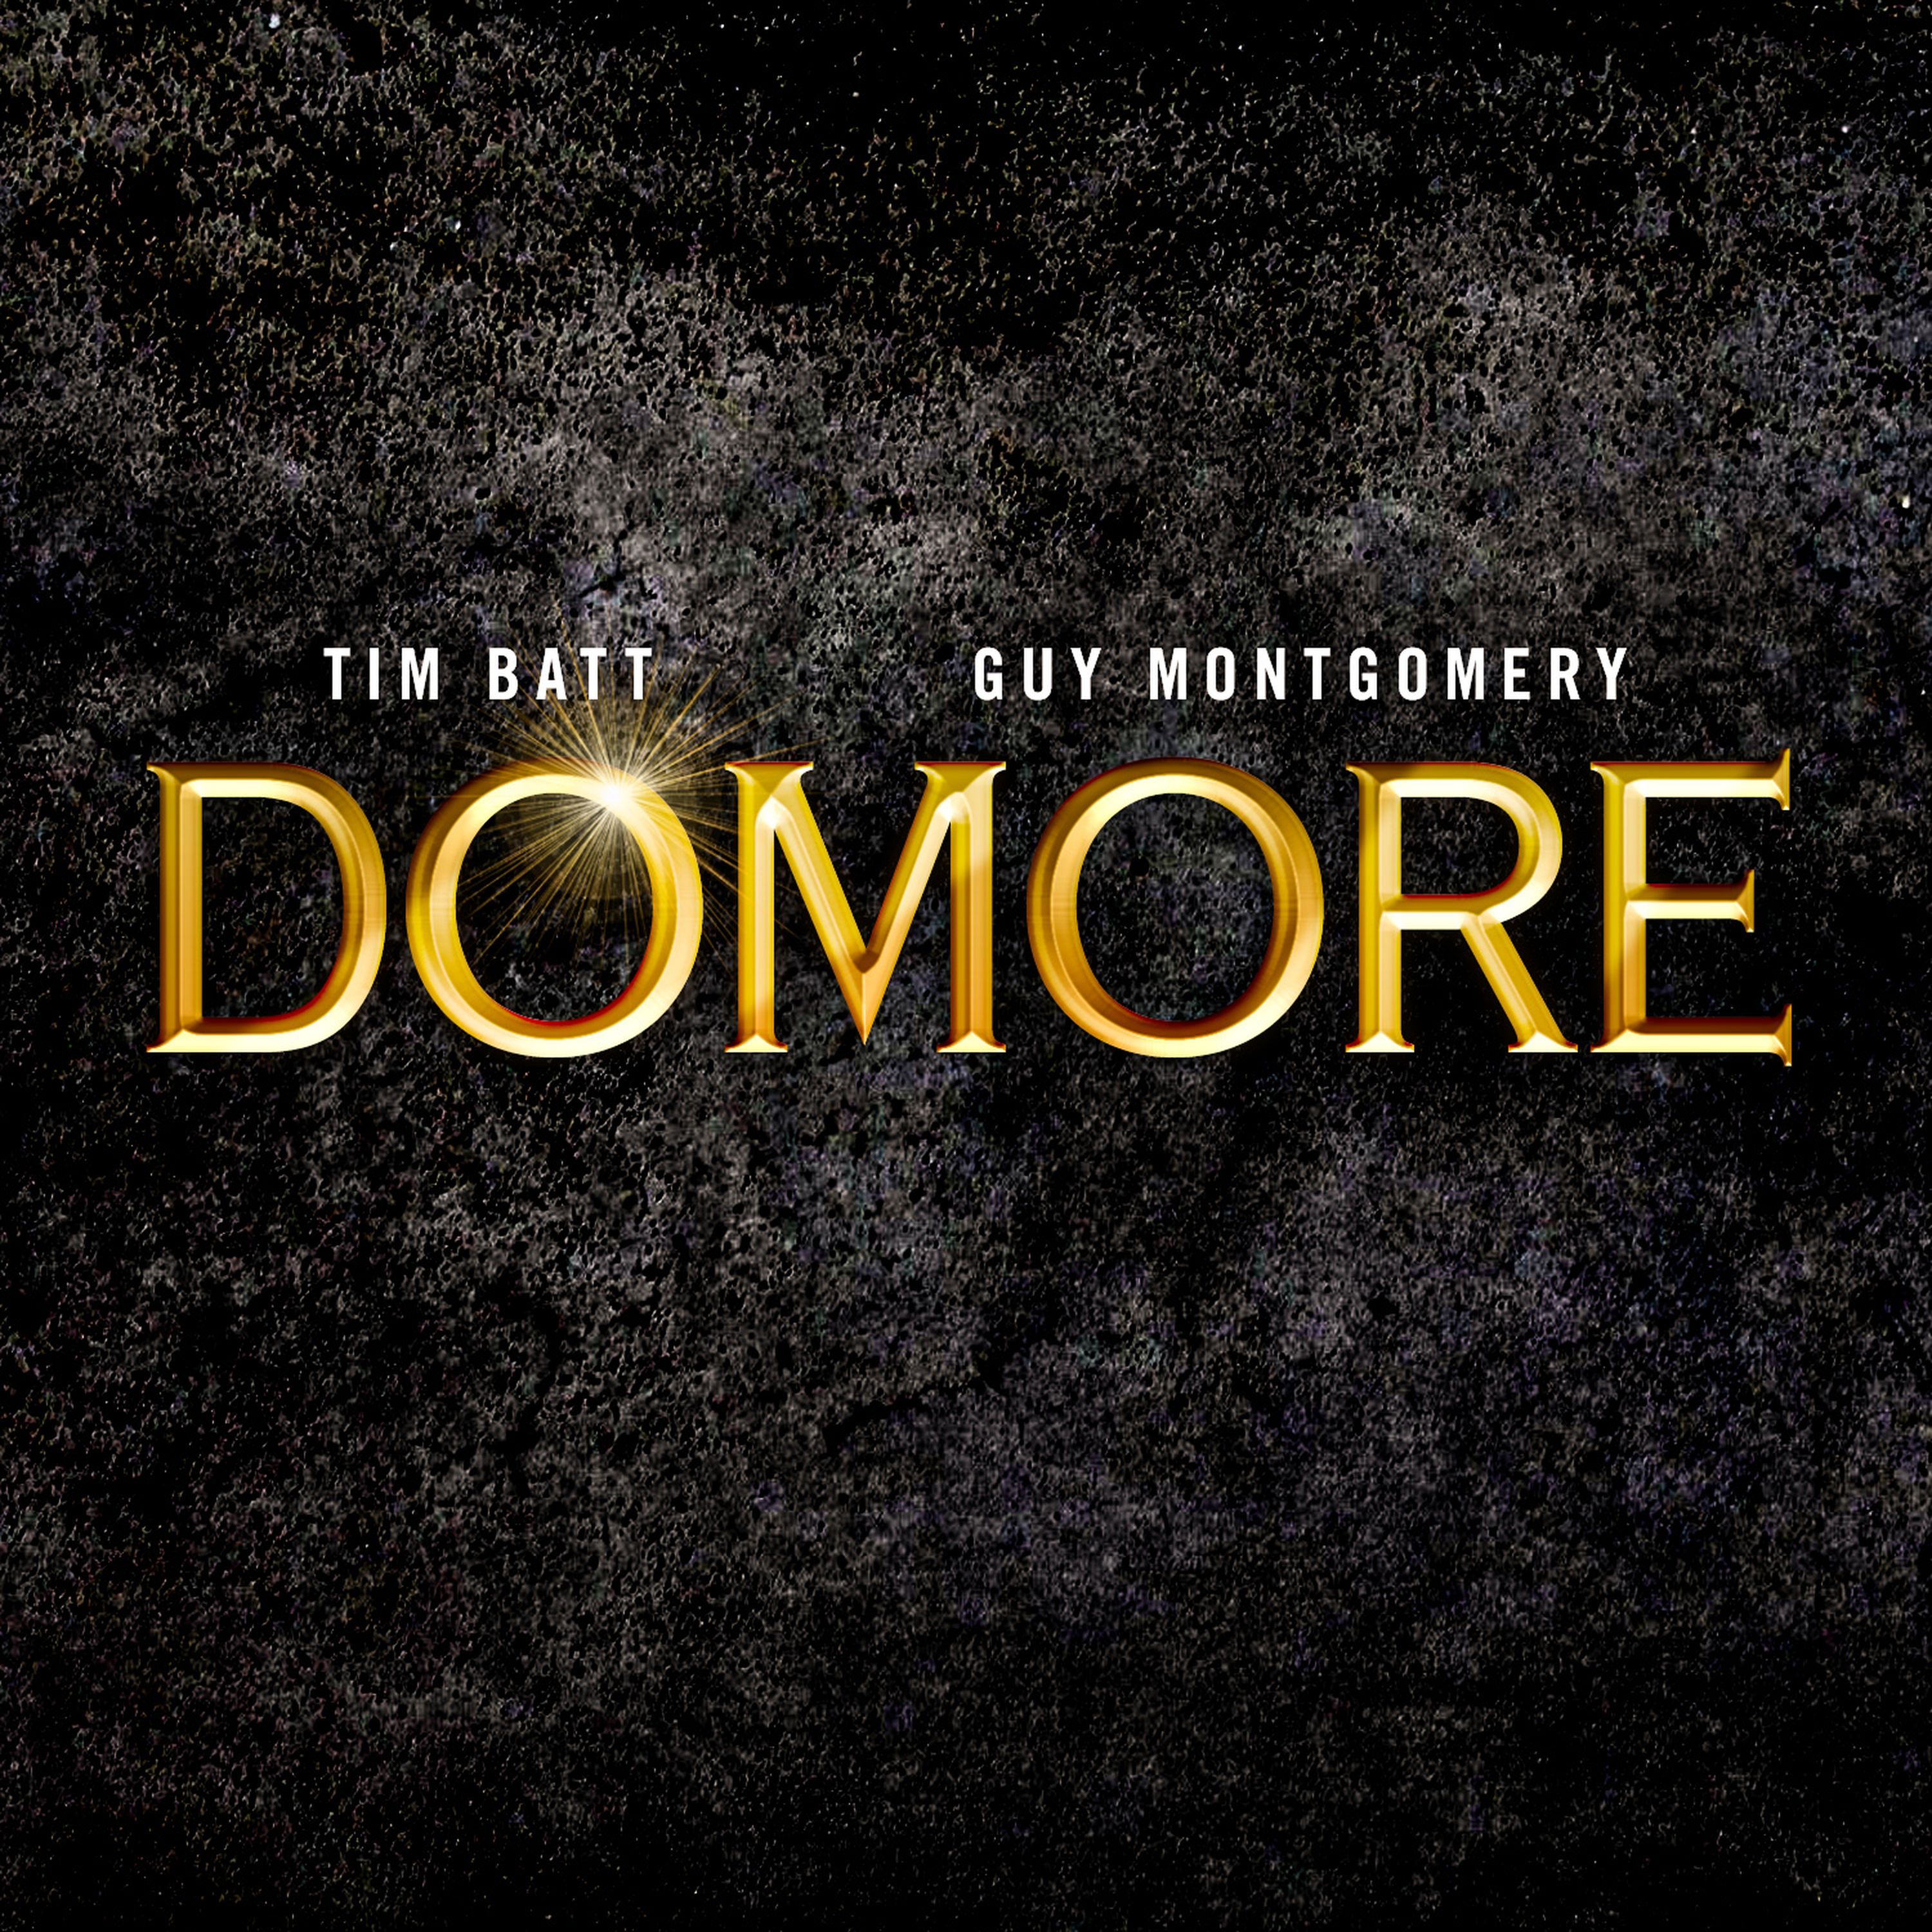 Welcome to Domore